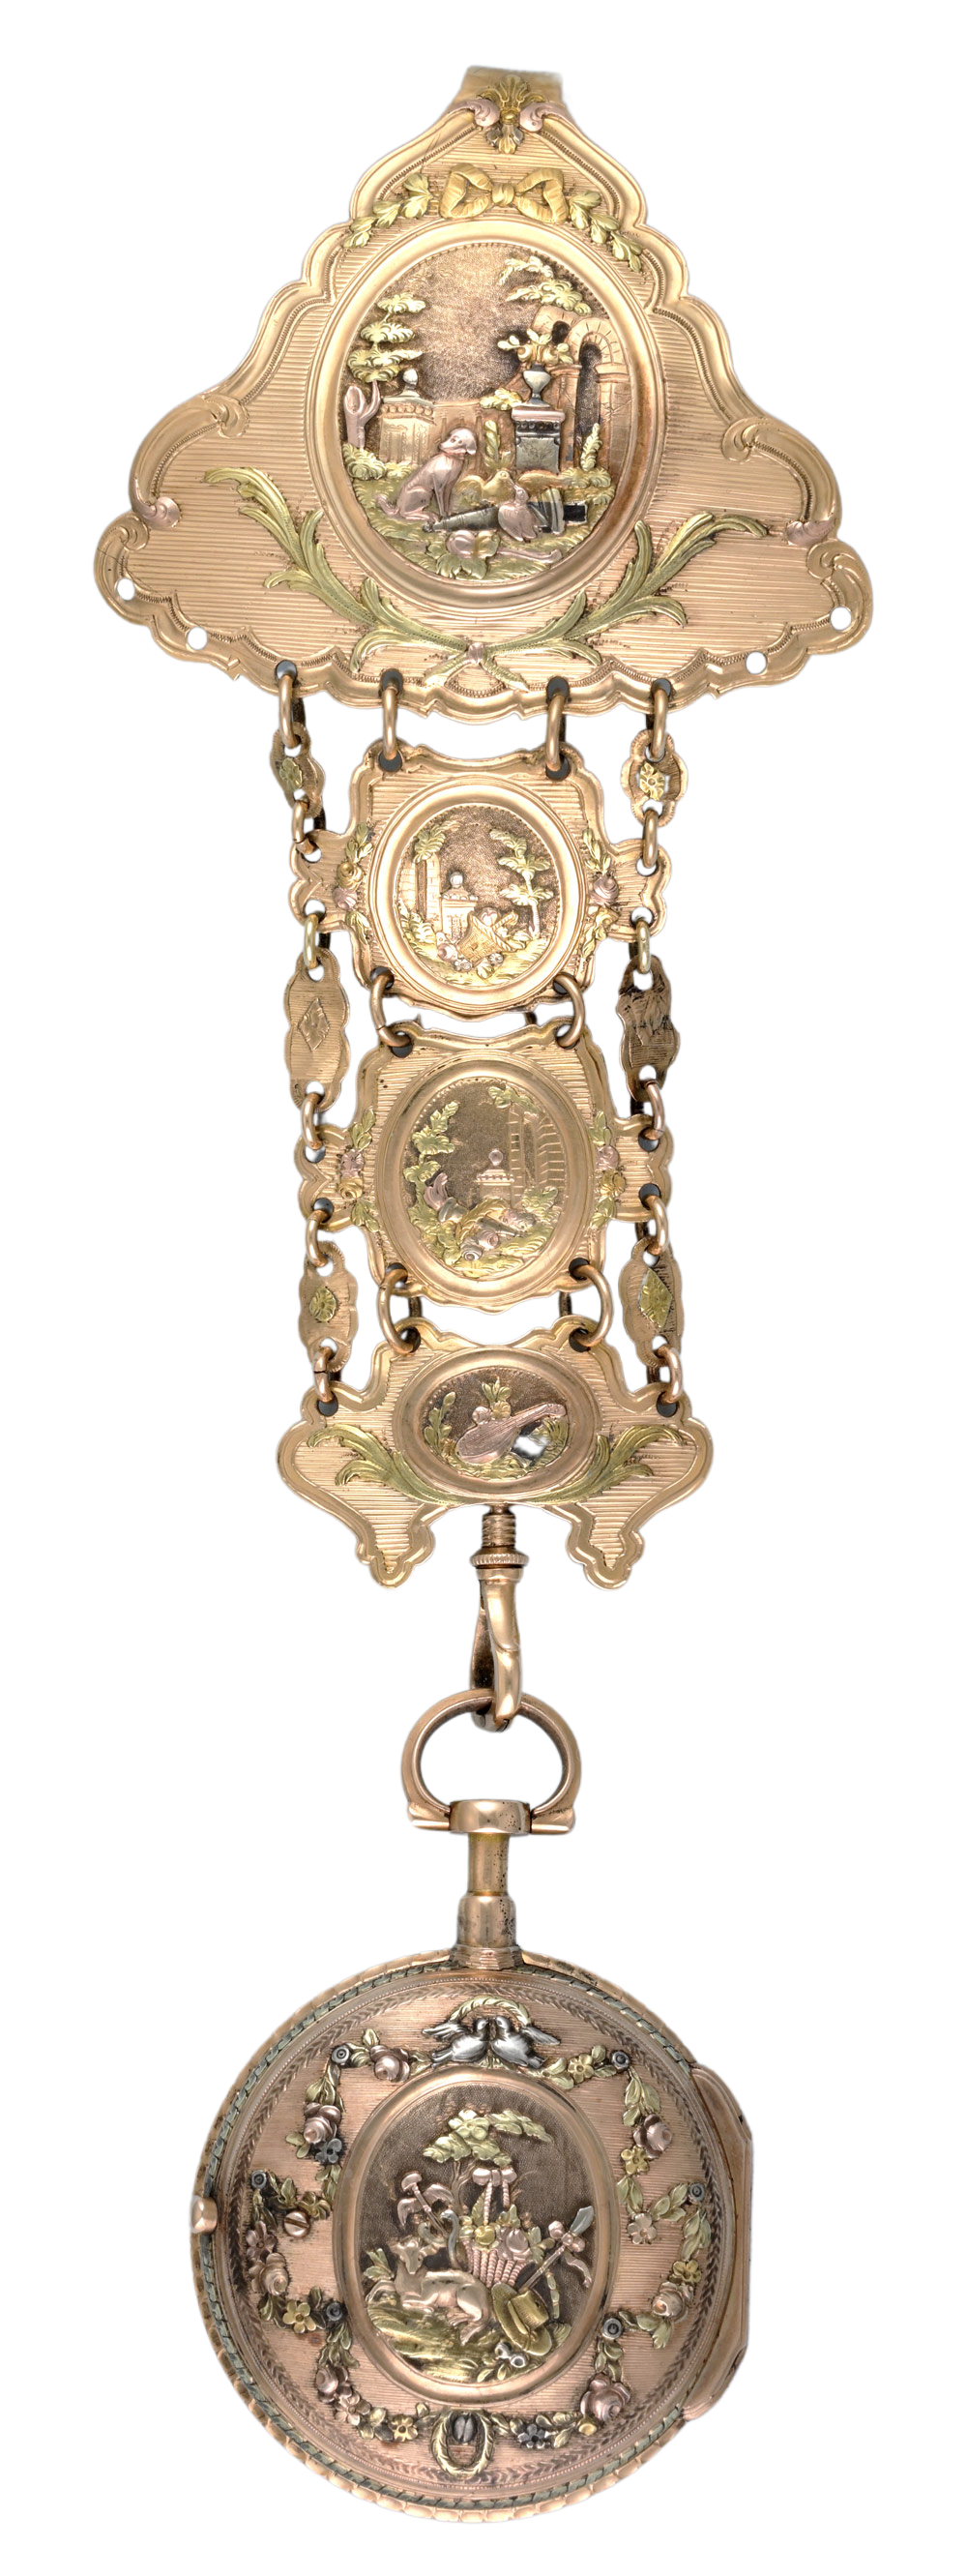 Gold and Enamel Chatelaine Repeating Virgule – Circa 1790 | Watch Museum:  Discover the World of Antique & Vintage Pocket Watches